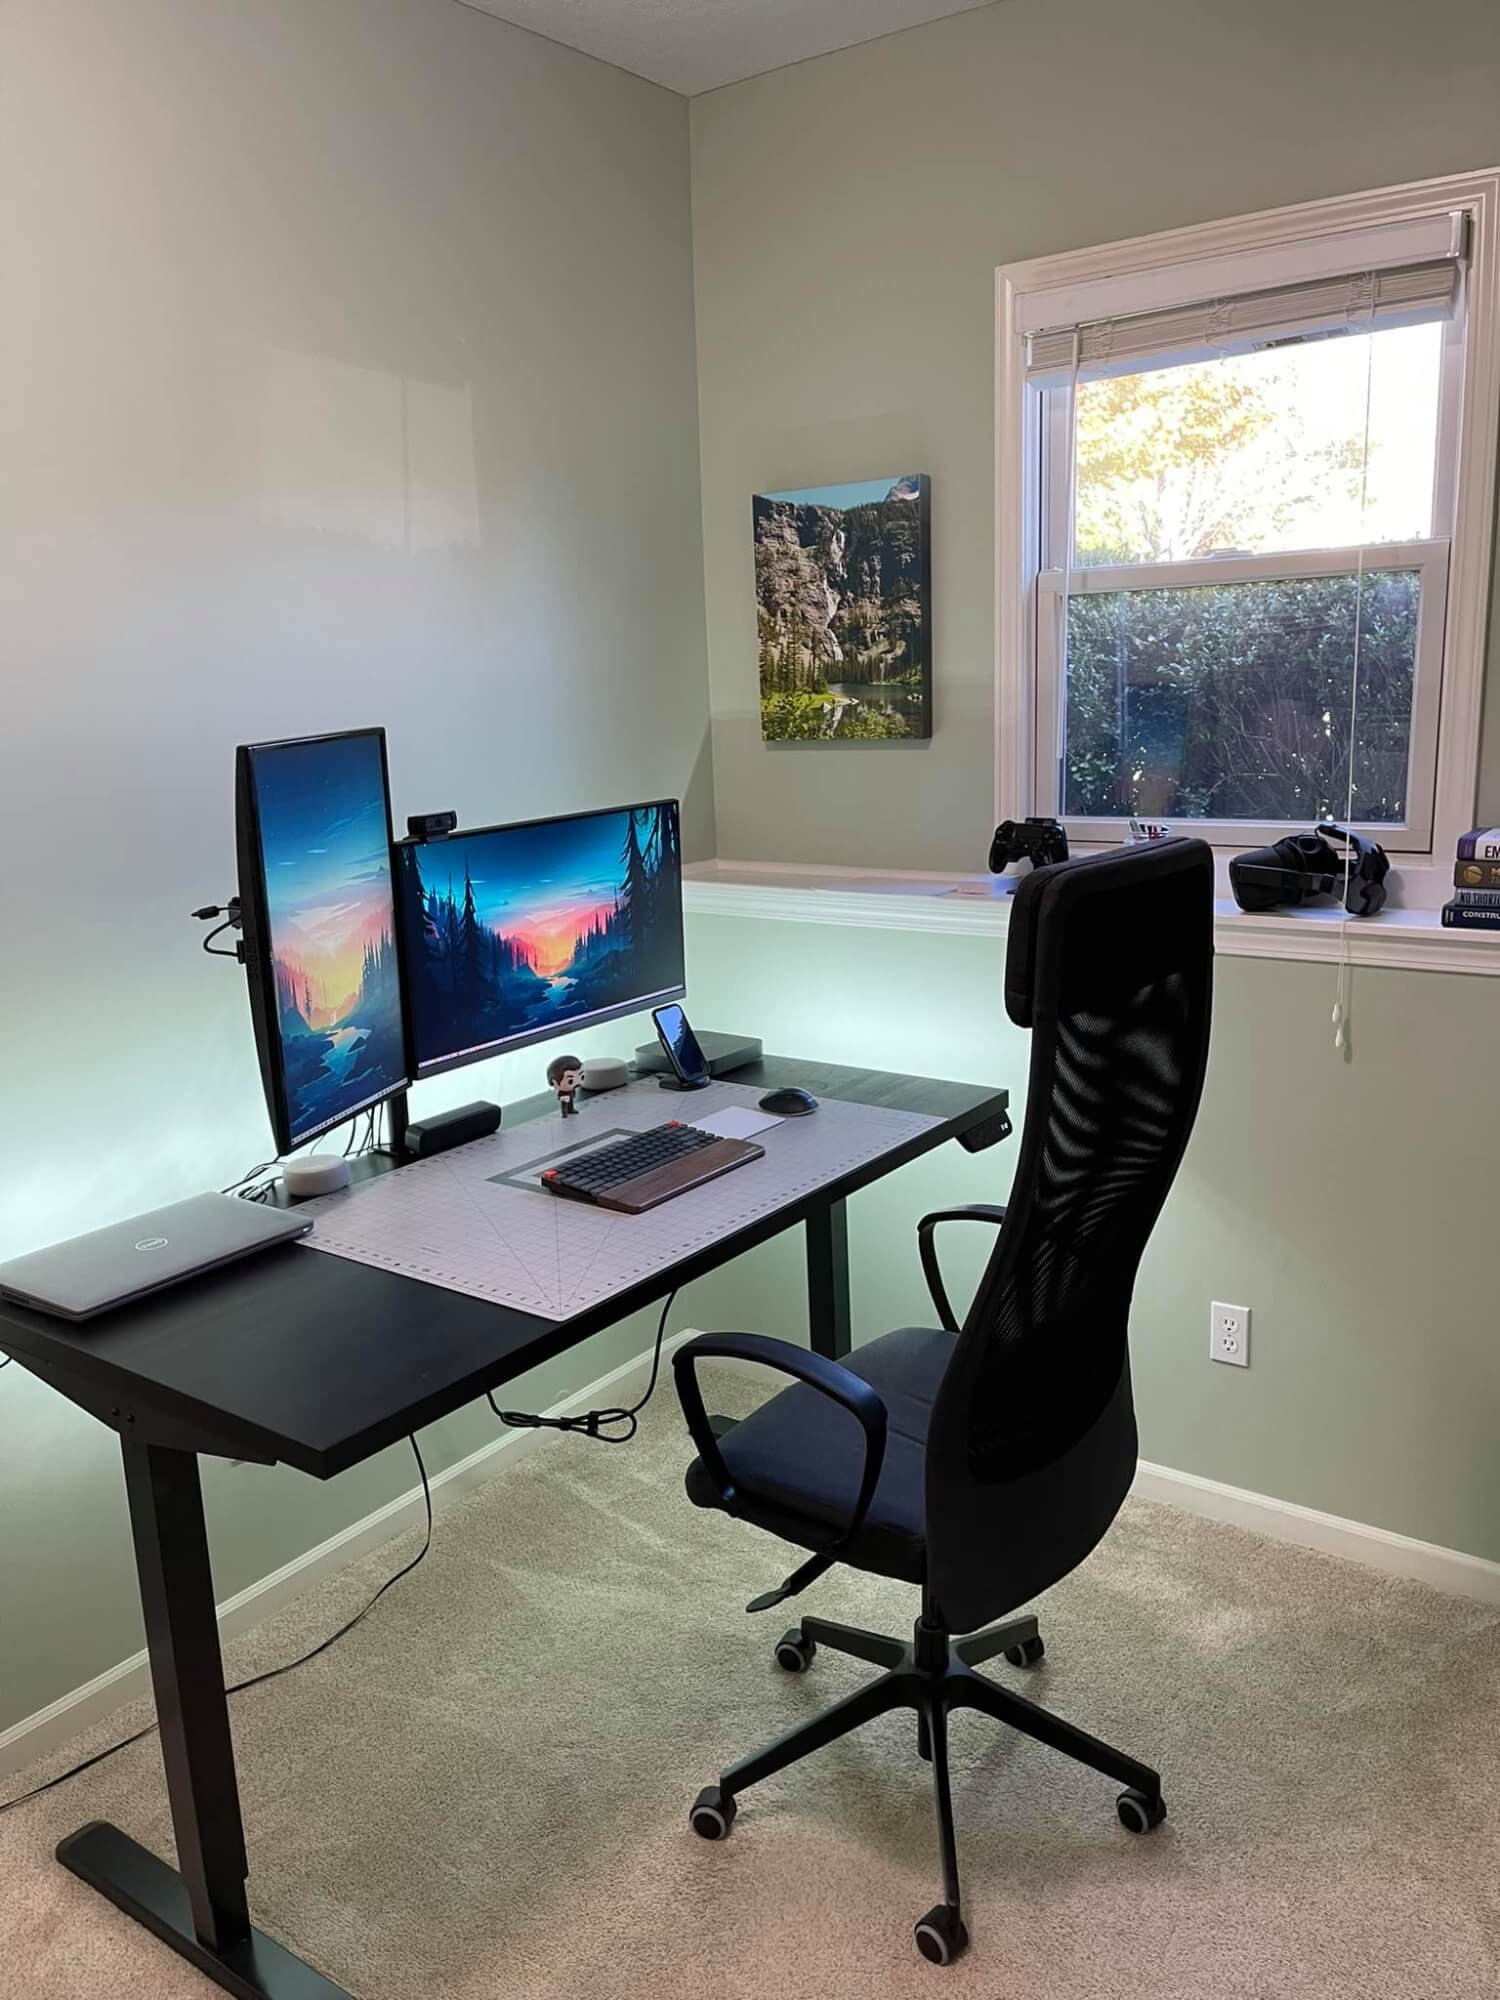 VIVO electric standing desk and an IKEA tabletop